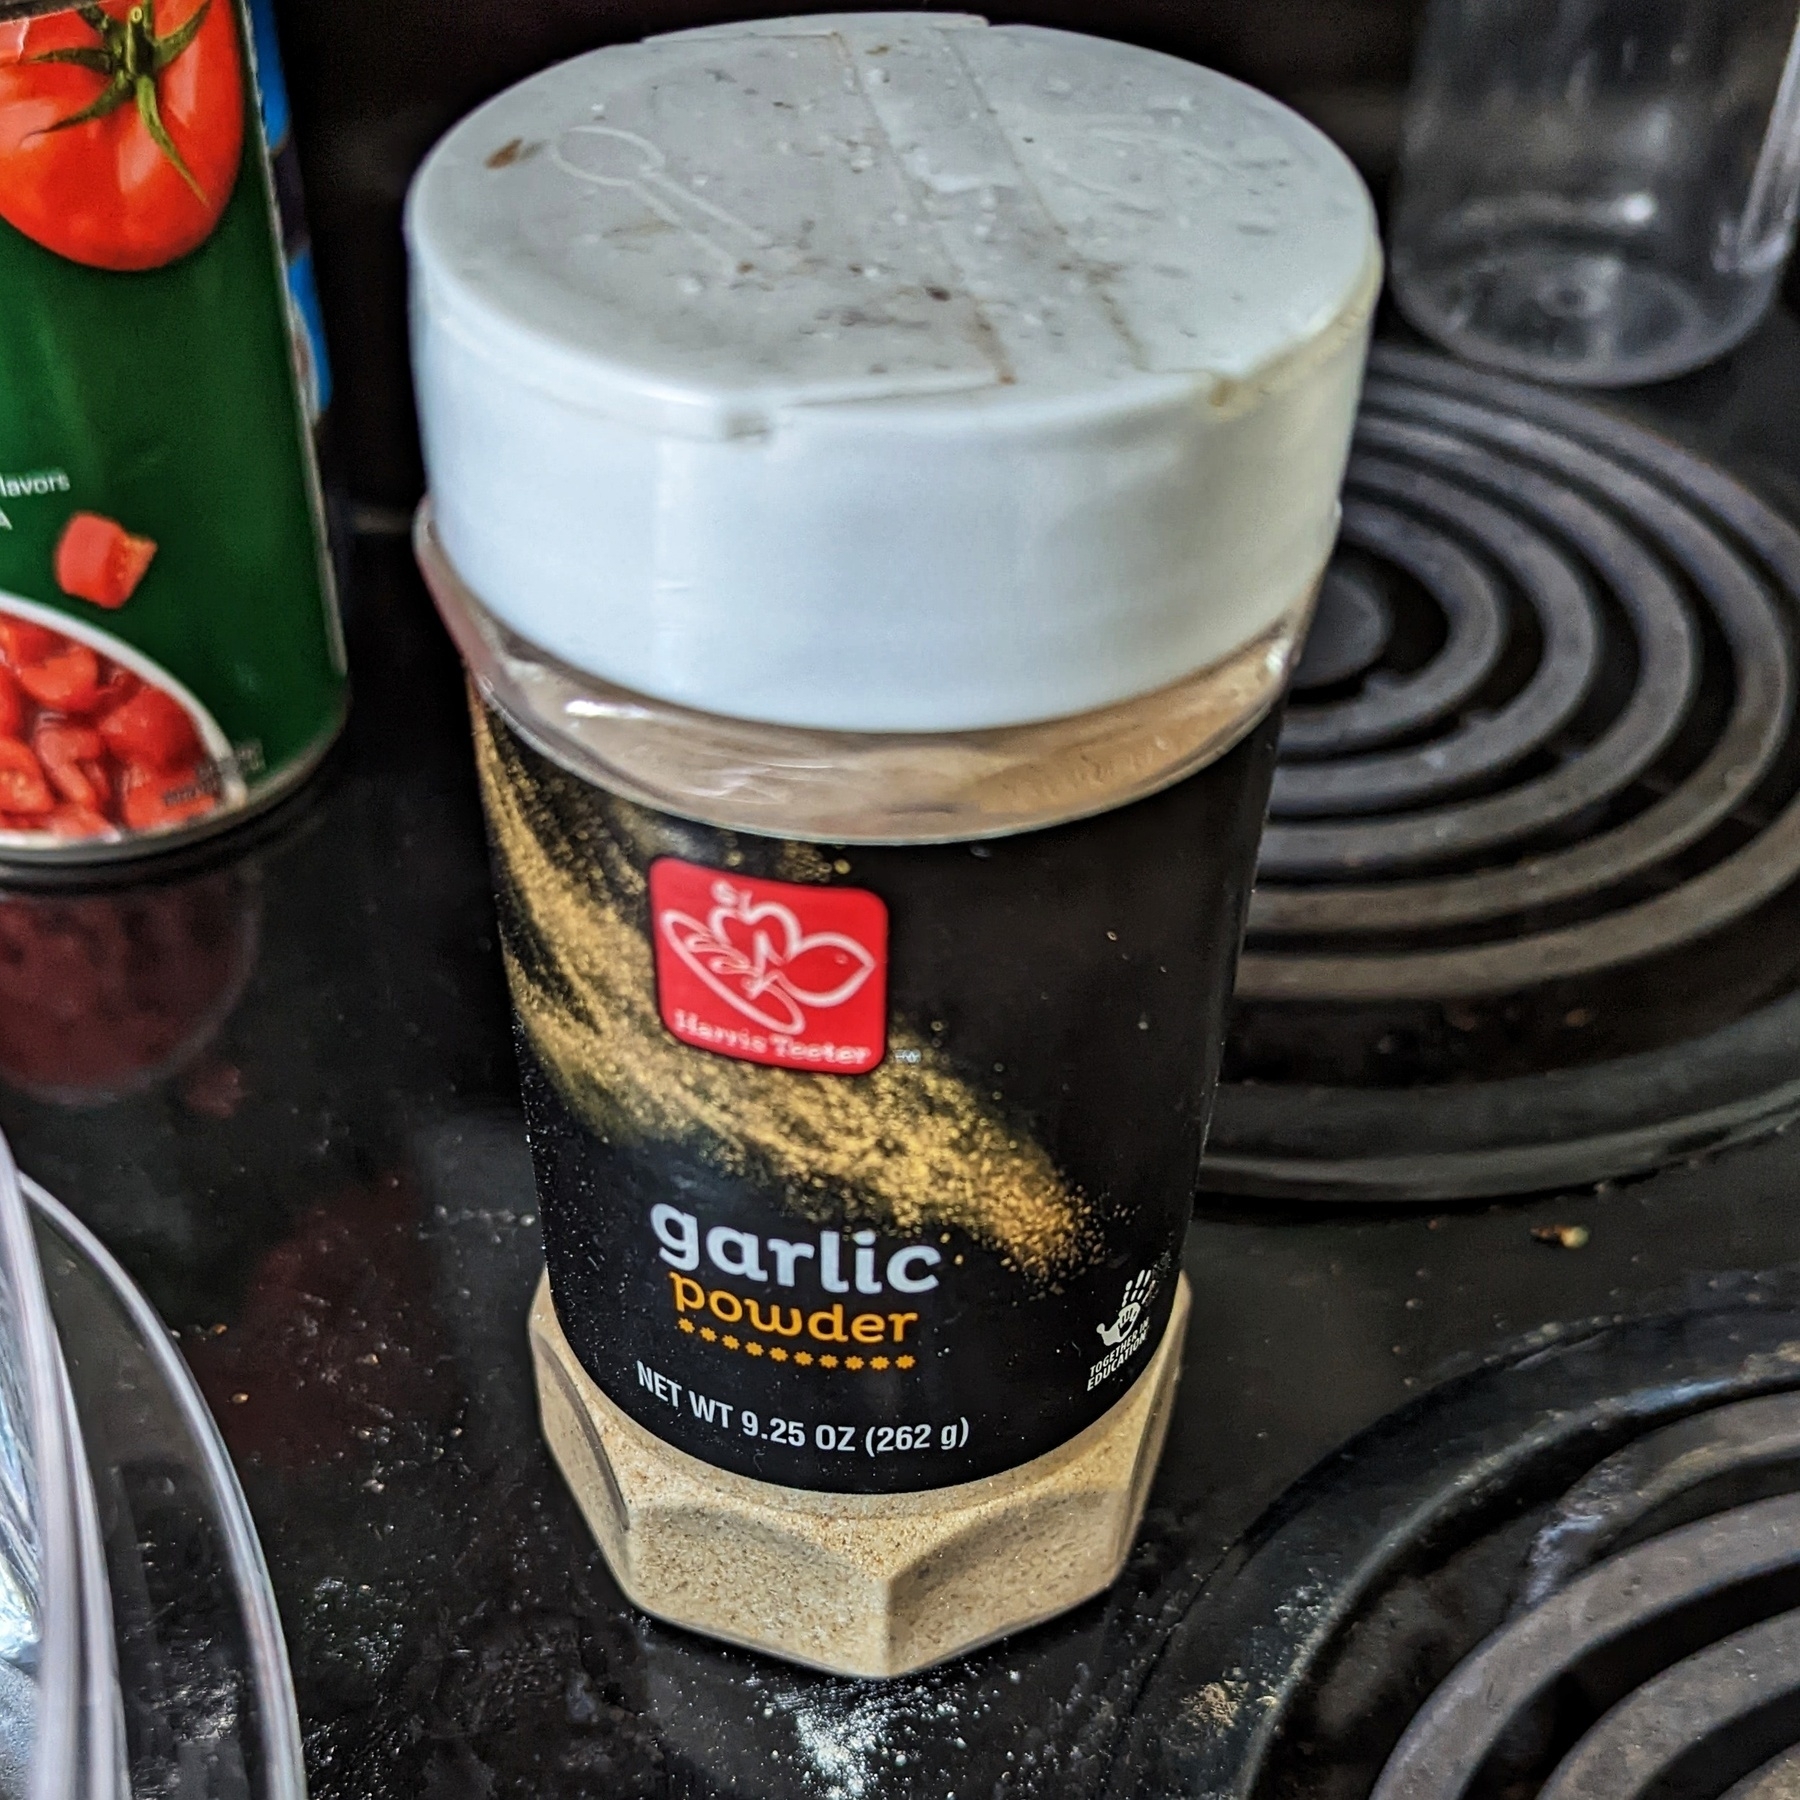 A container of garlic powder